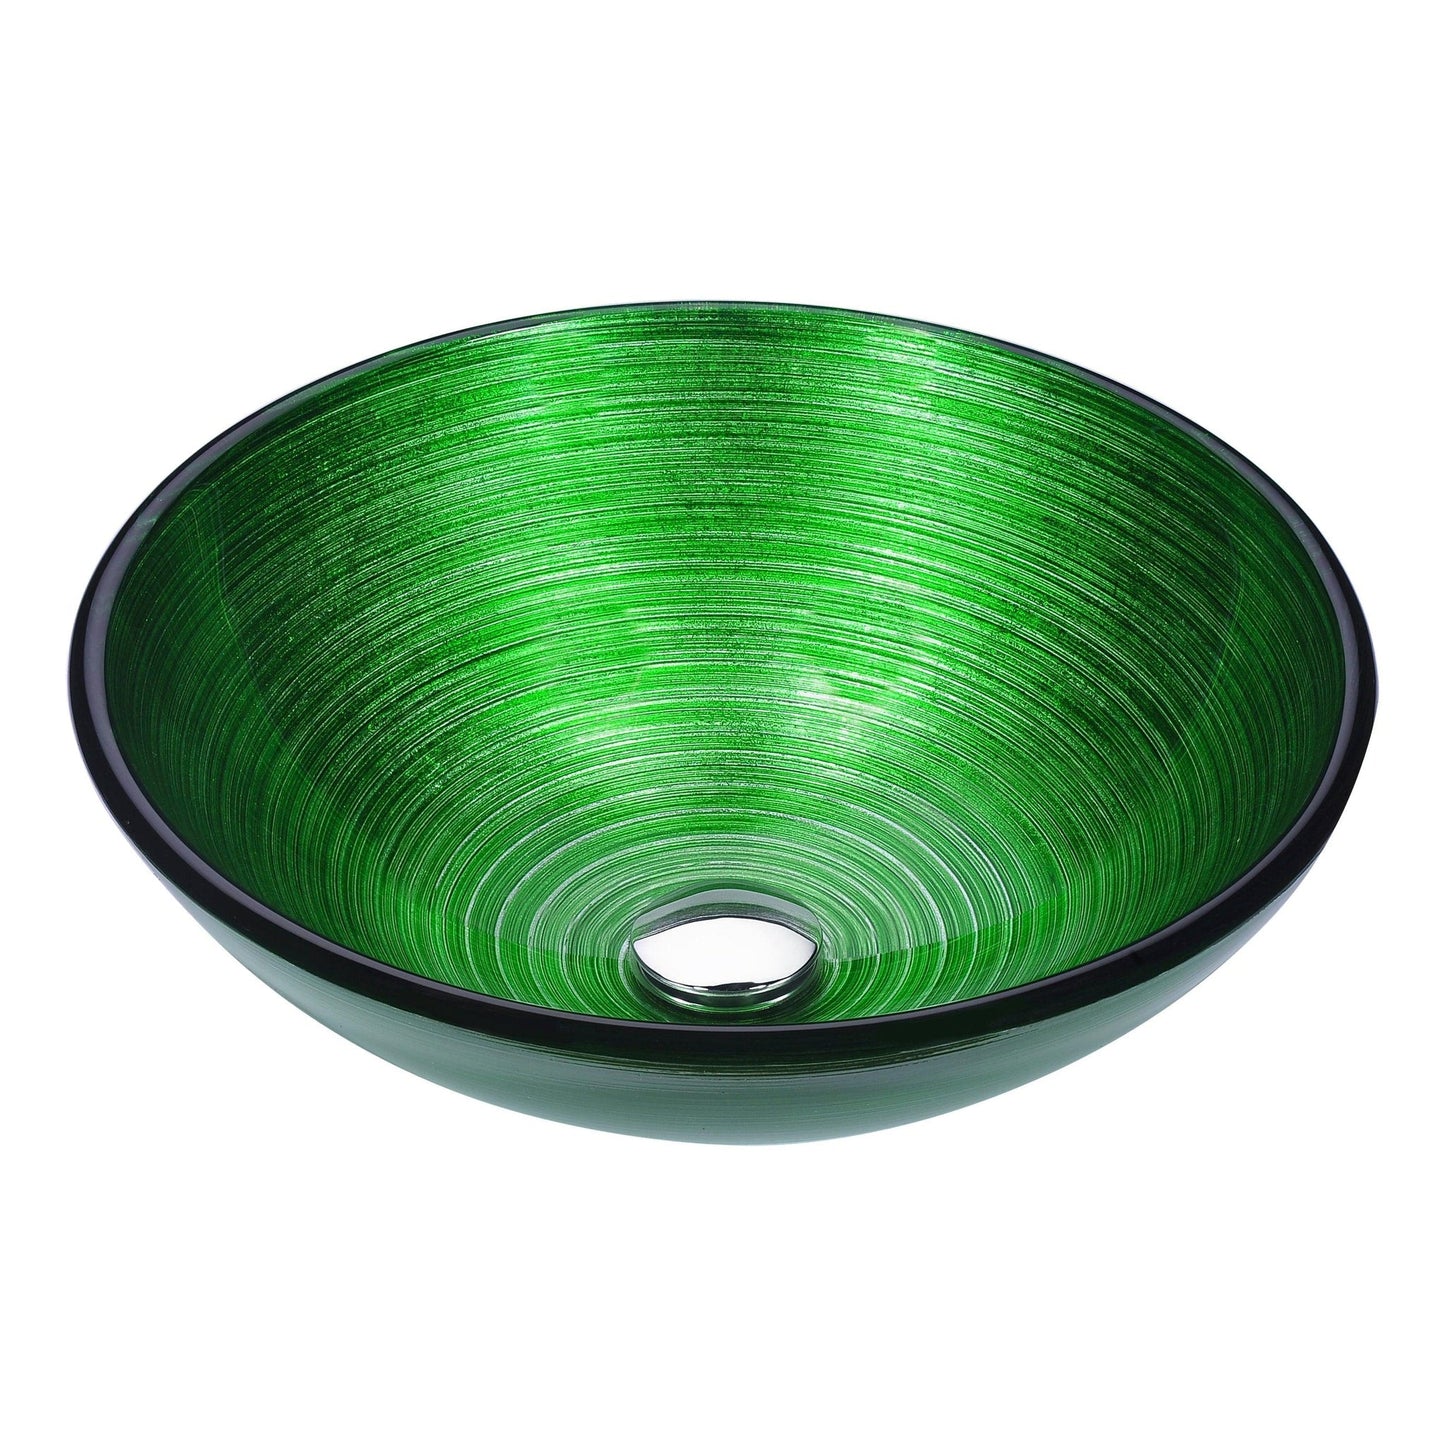 ANZZI Gardena Series 17" x 17" Round Brushed Green Deco-Glass Vessel Sink With Polished Chrome Pop-Up Drain